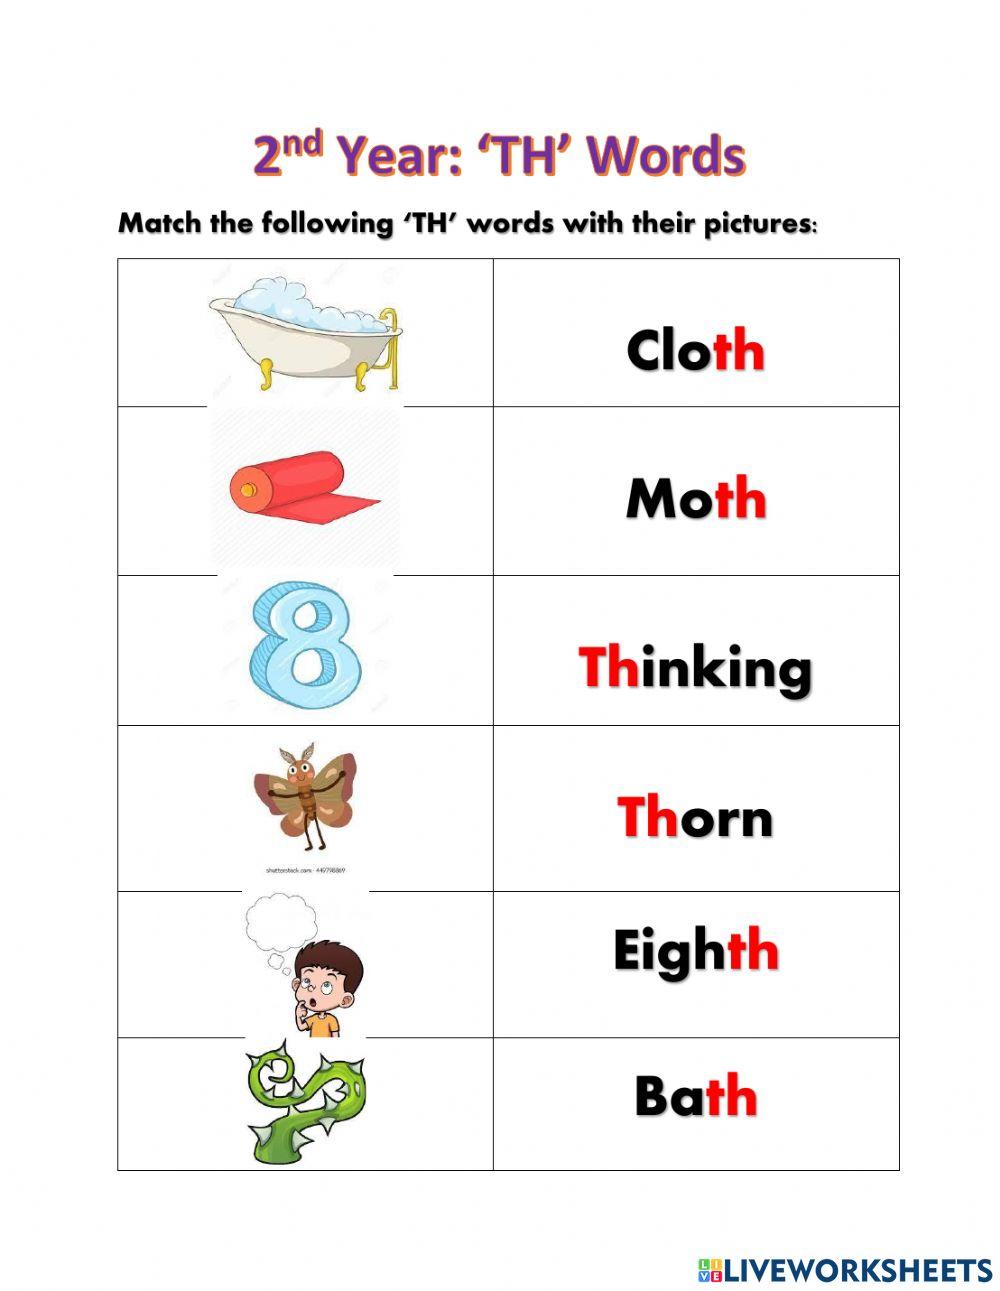 'TH' Words